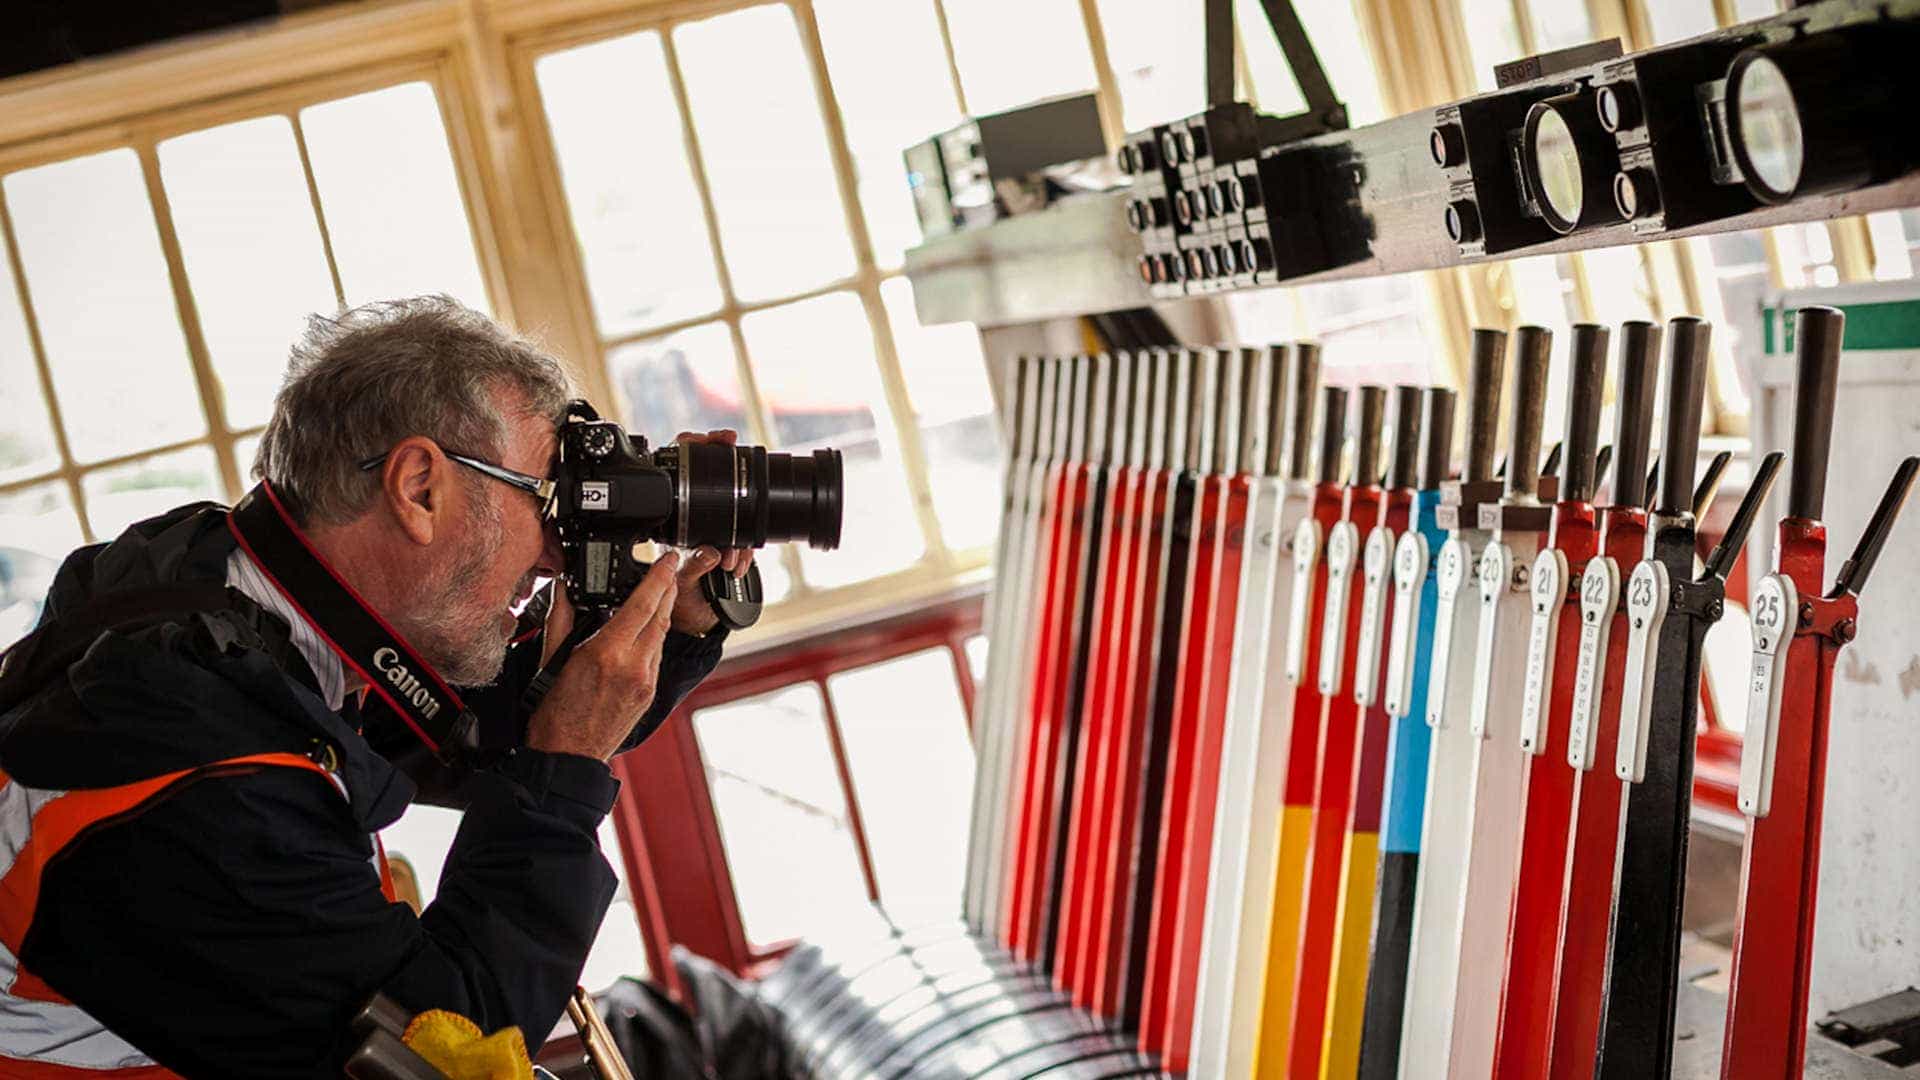 East Lancashire Railway Behind-the-Scenes Photography Experience